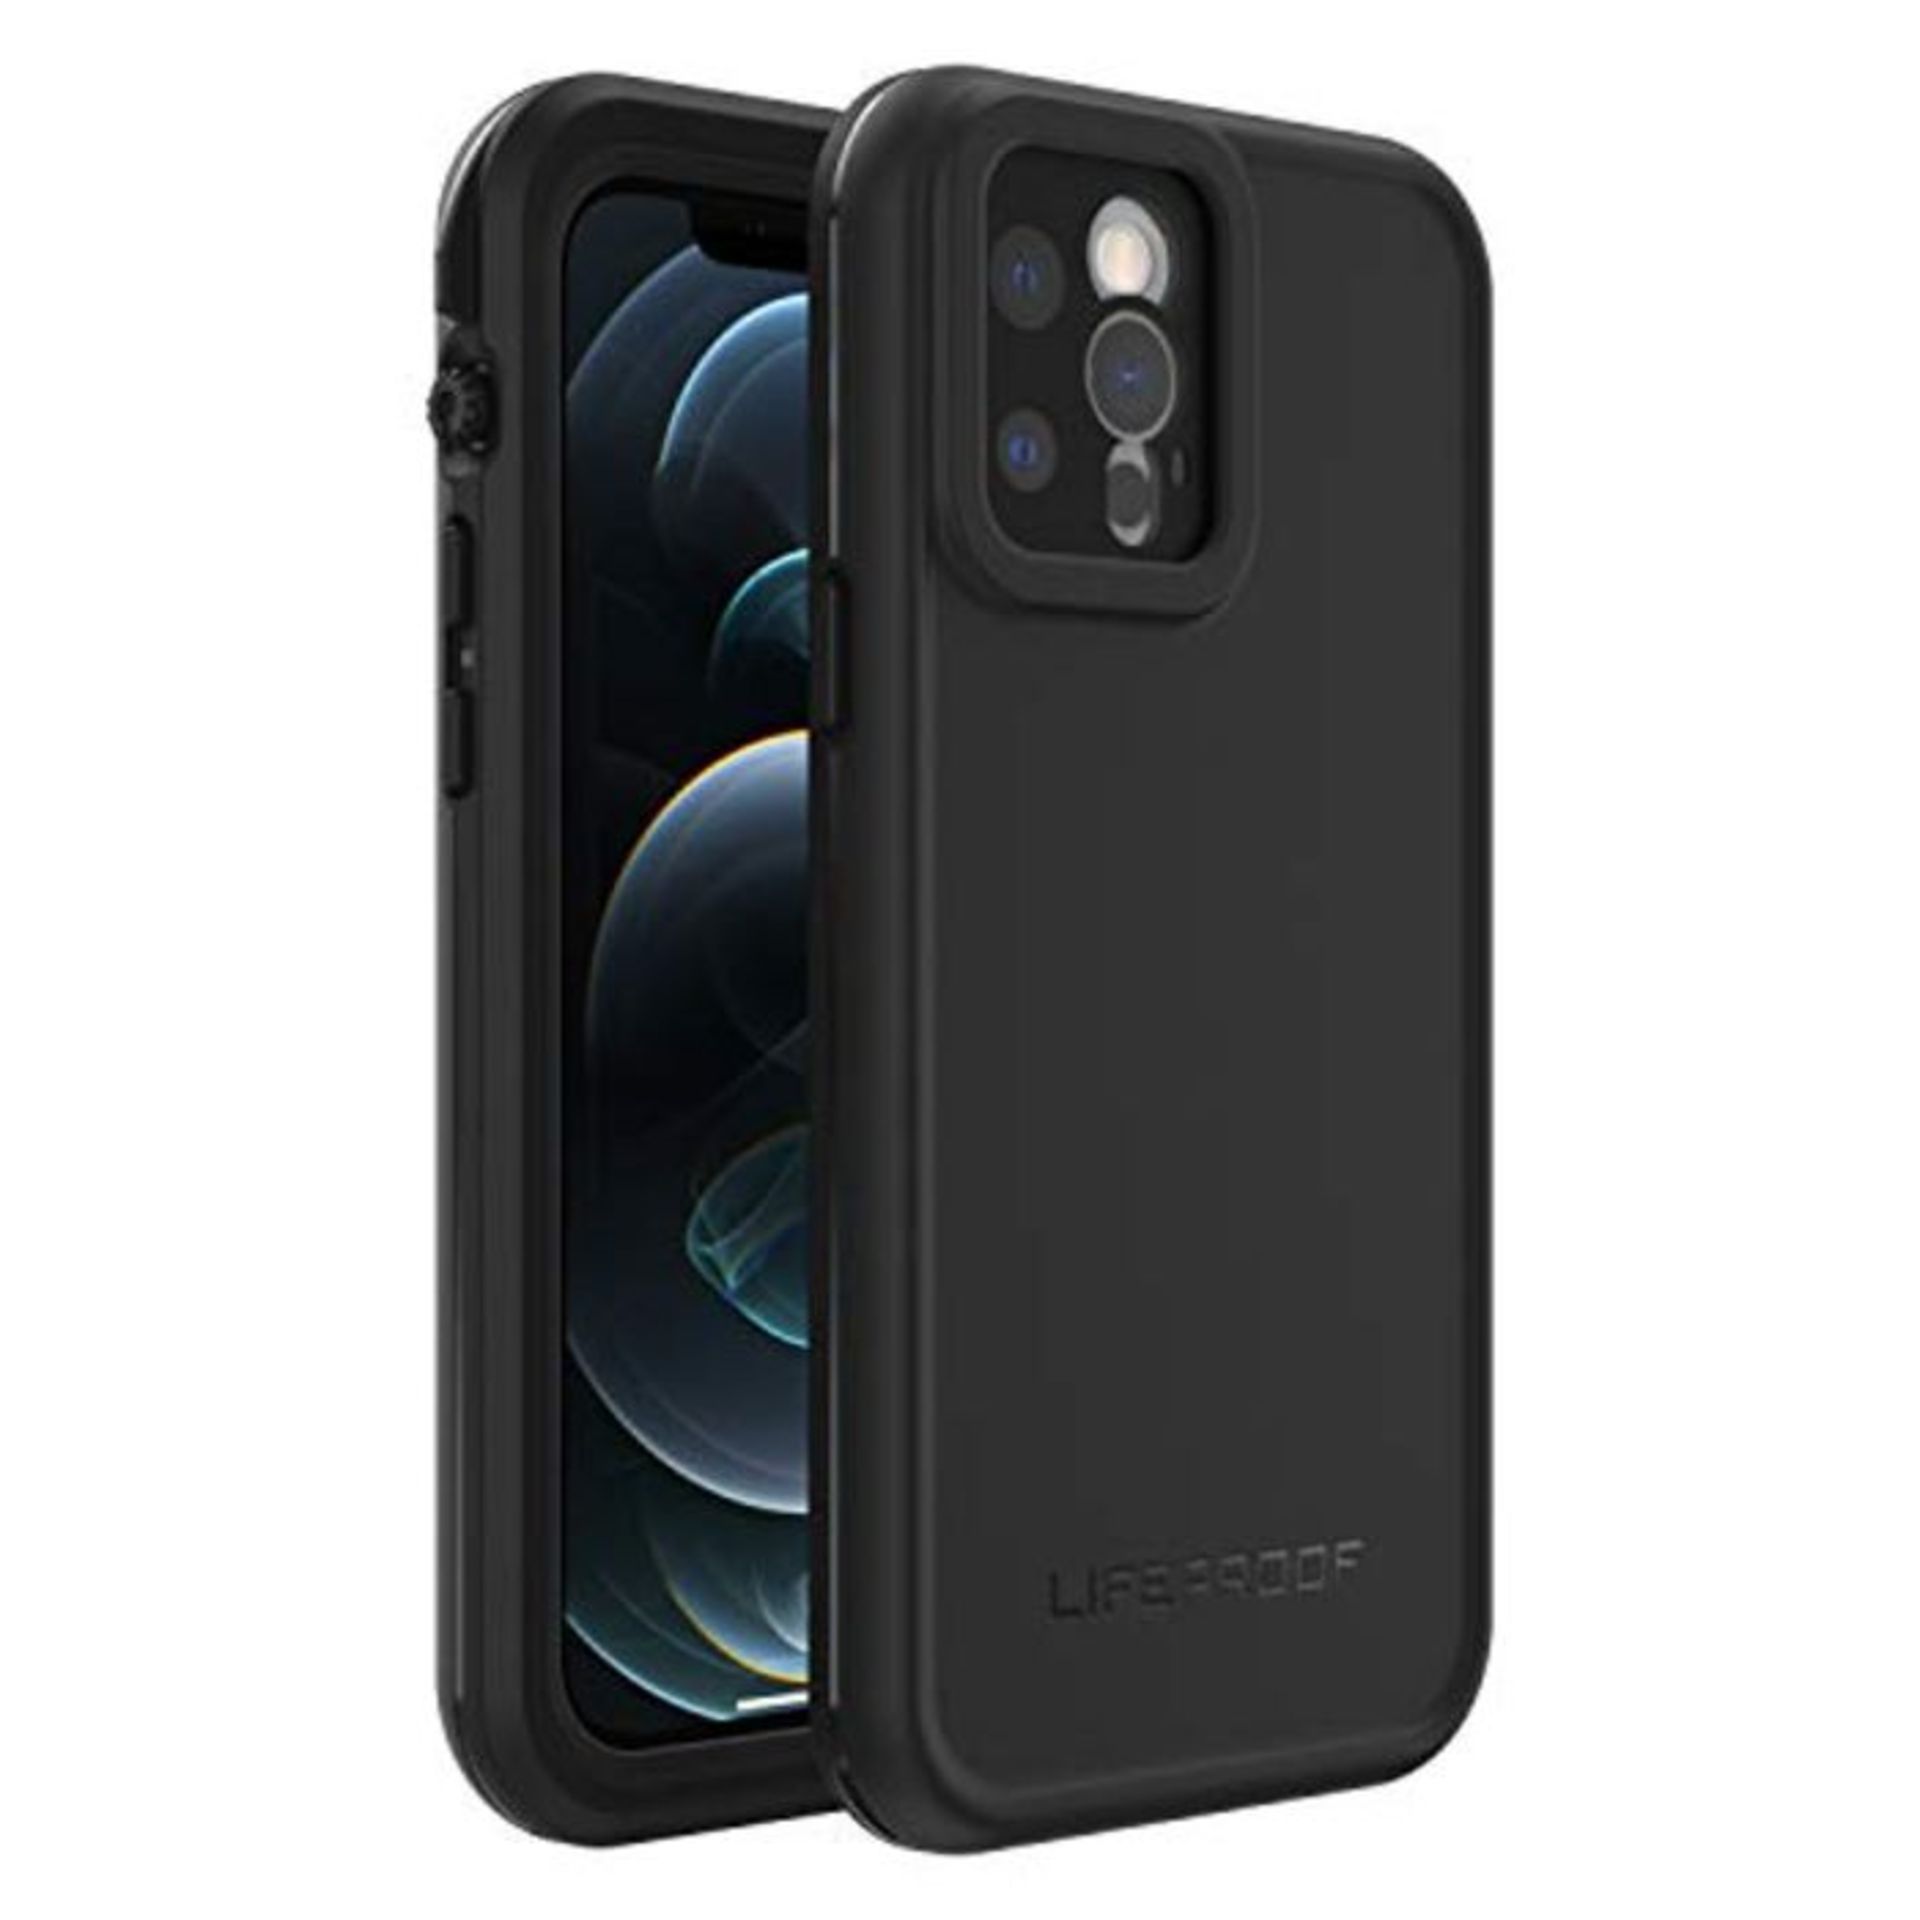 LifeProof for iPhone 12 Pro, Waterproof Drop Protective Case, Fre Series, Black - Image 7 of 9